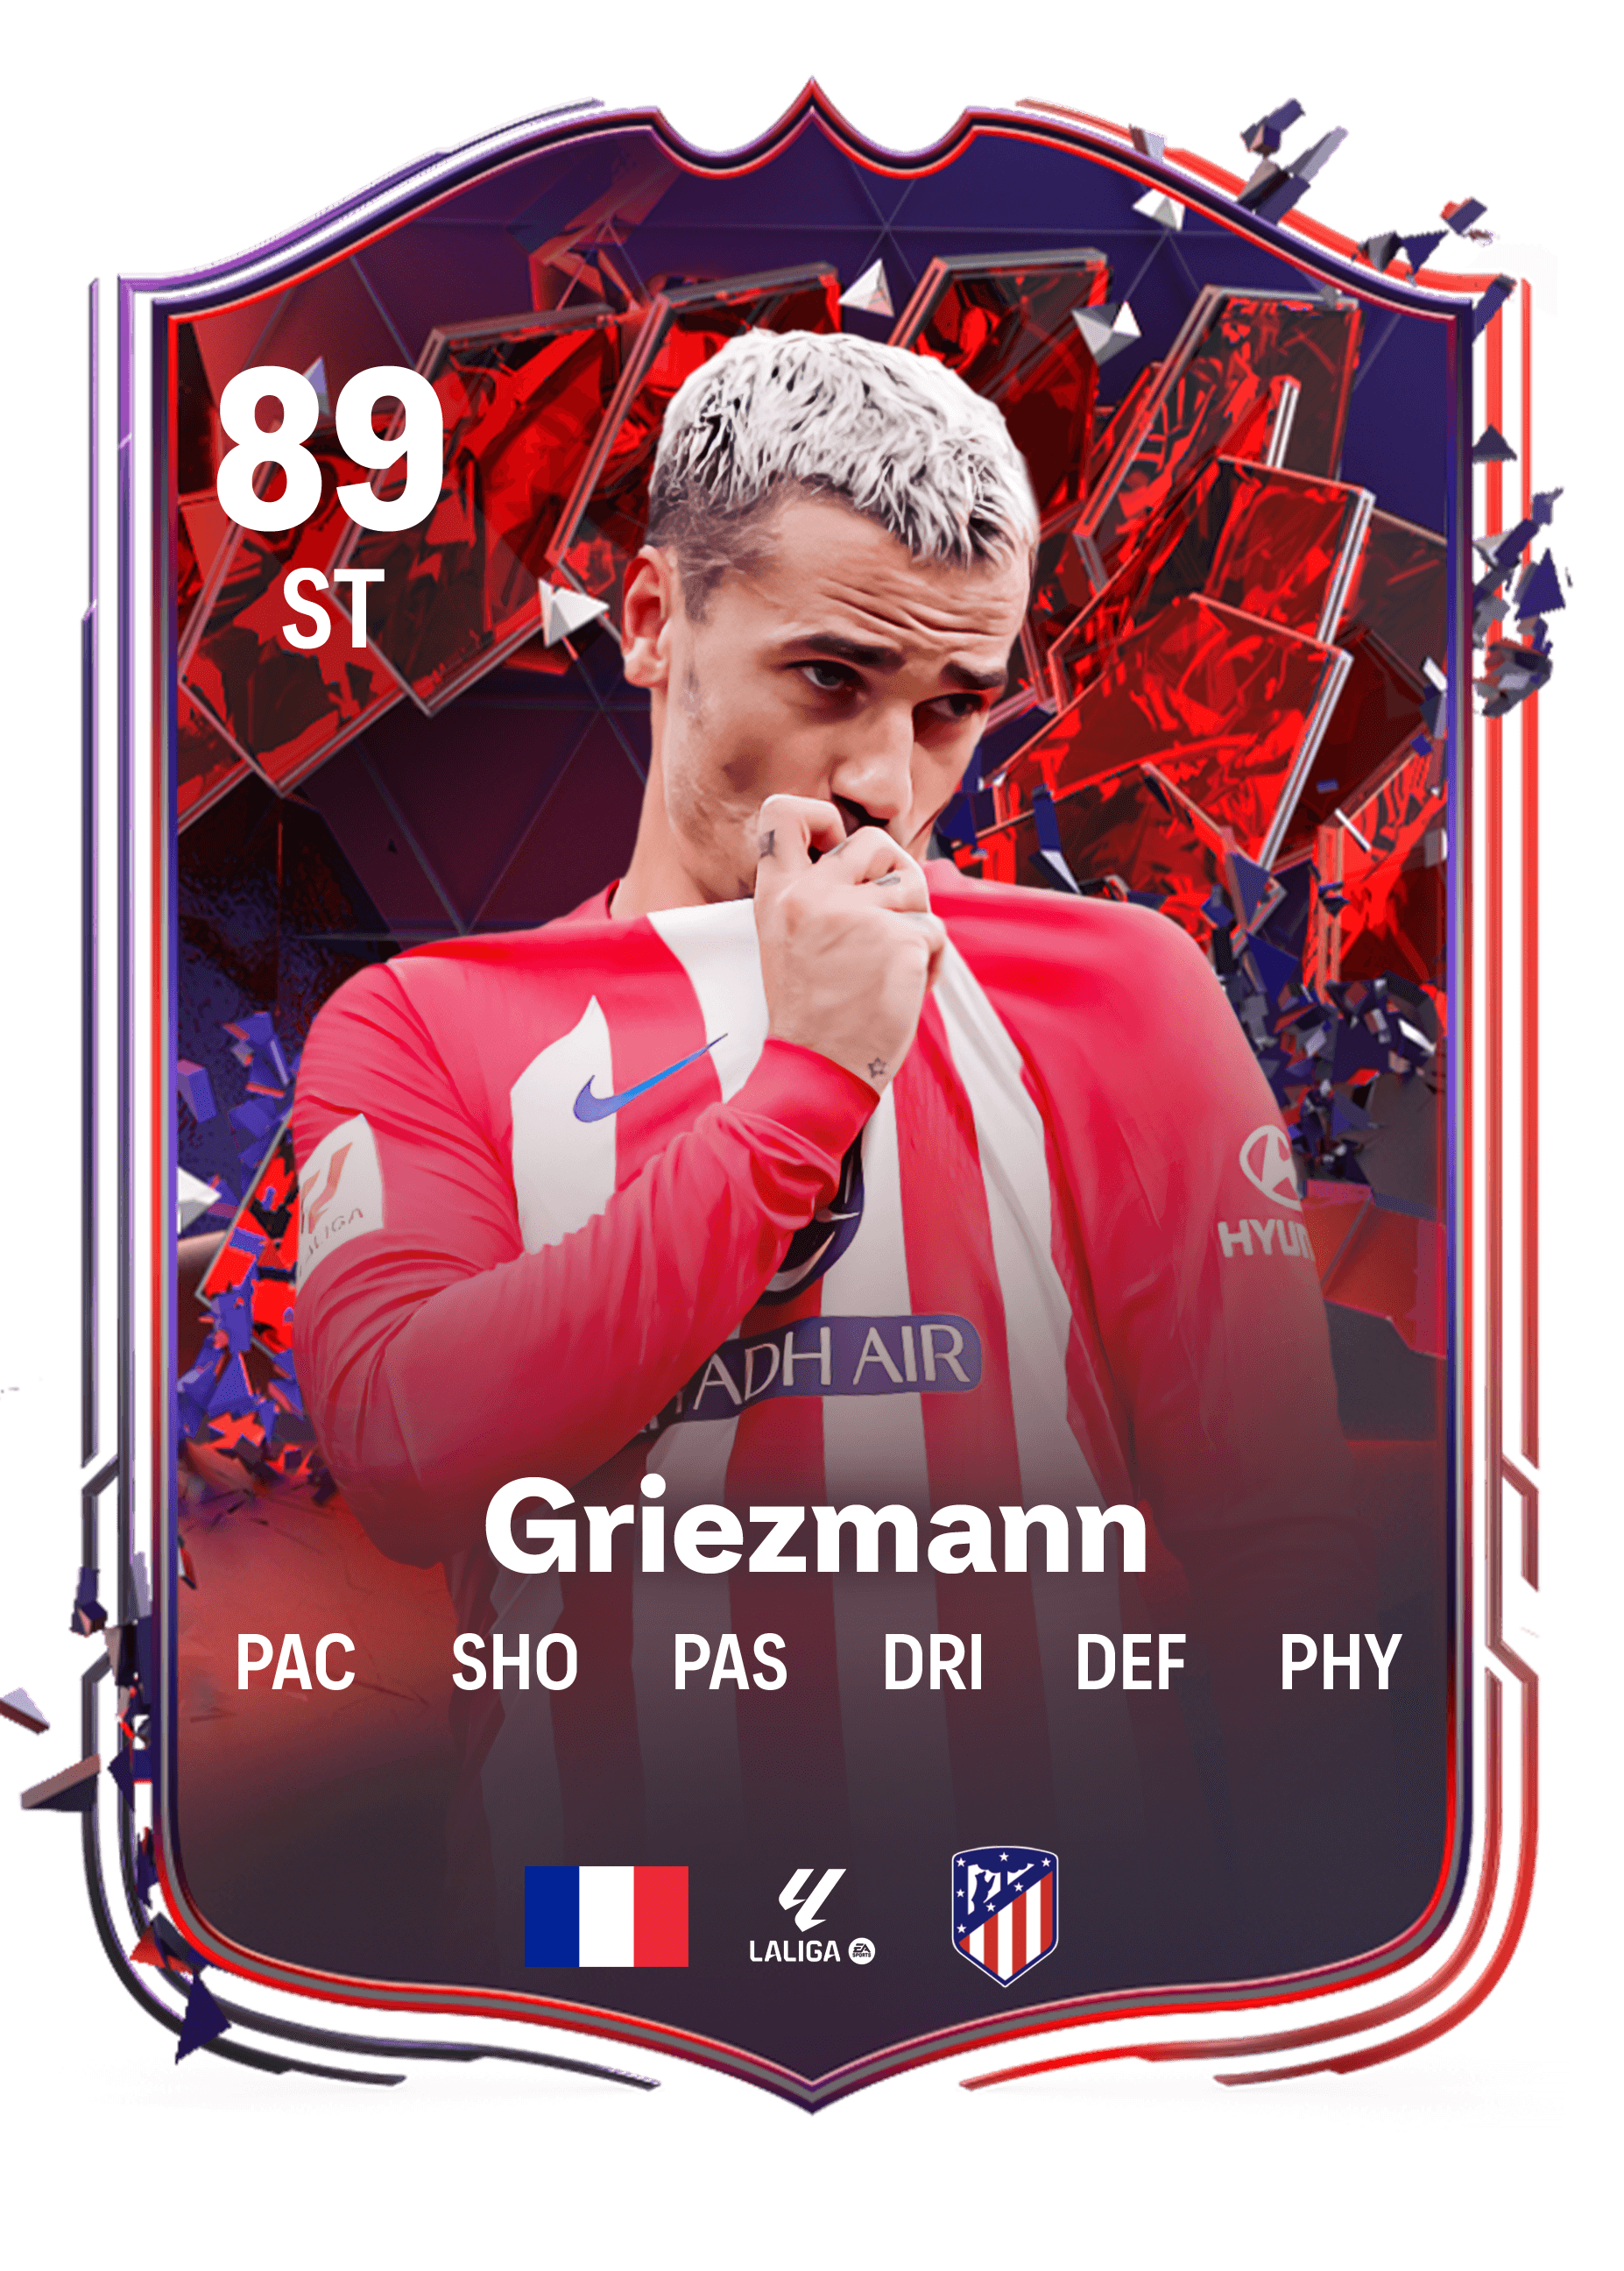 🚨Griezmann🇫🇷 is coming as TRAILBLAZERS player soon!🔥 Another